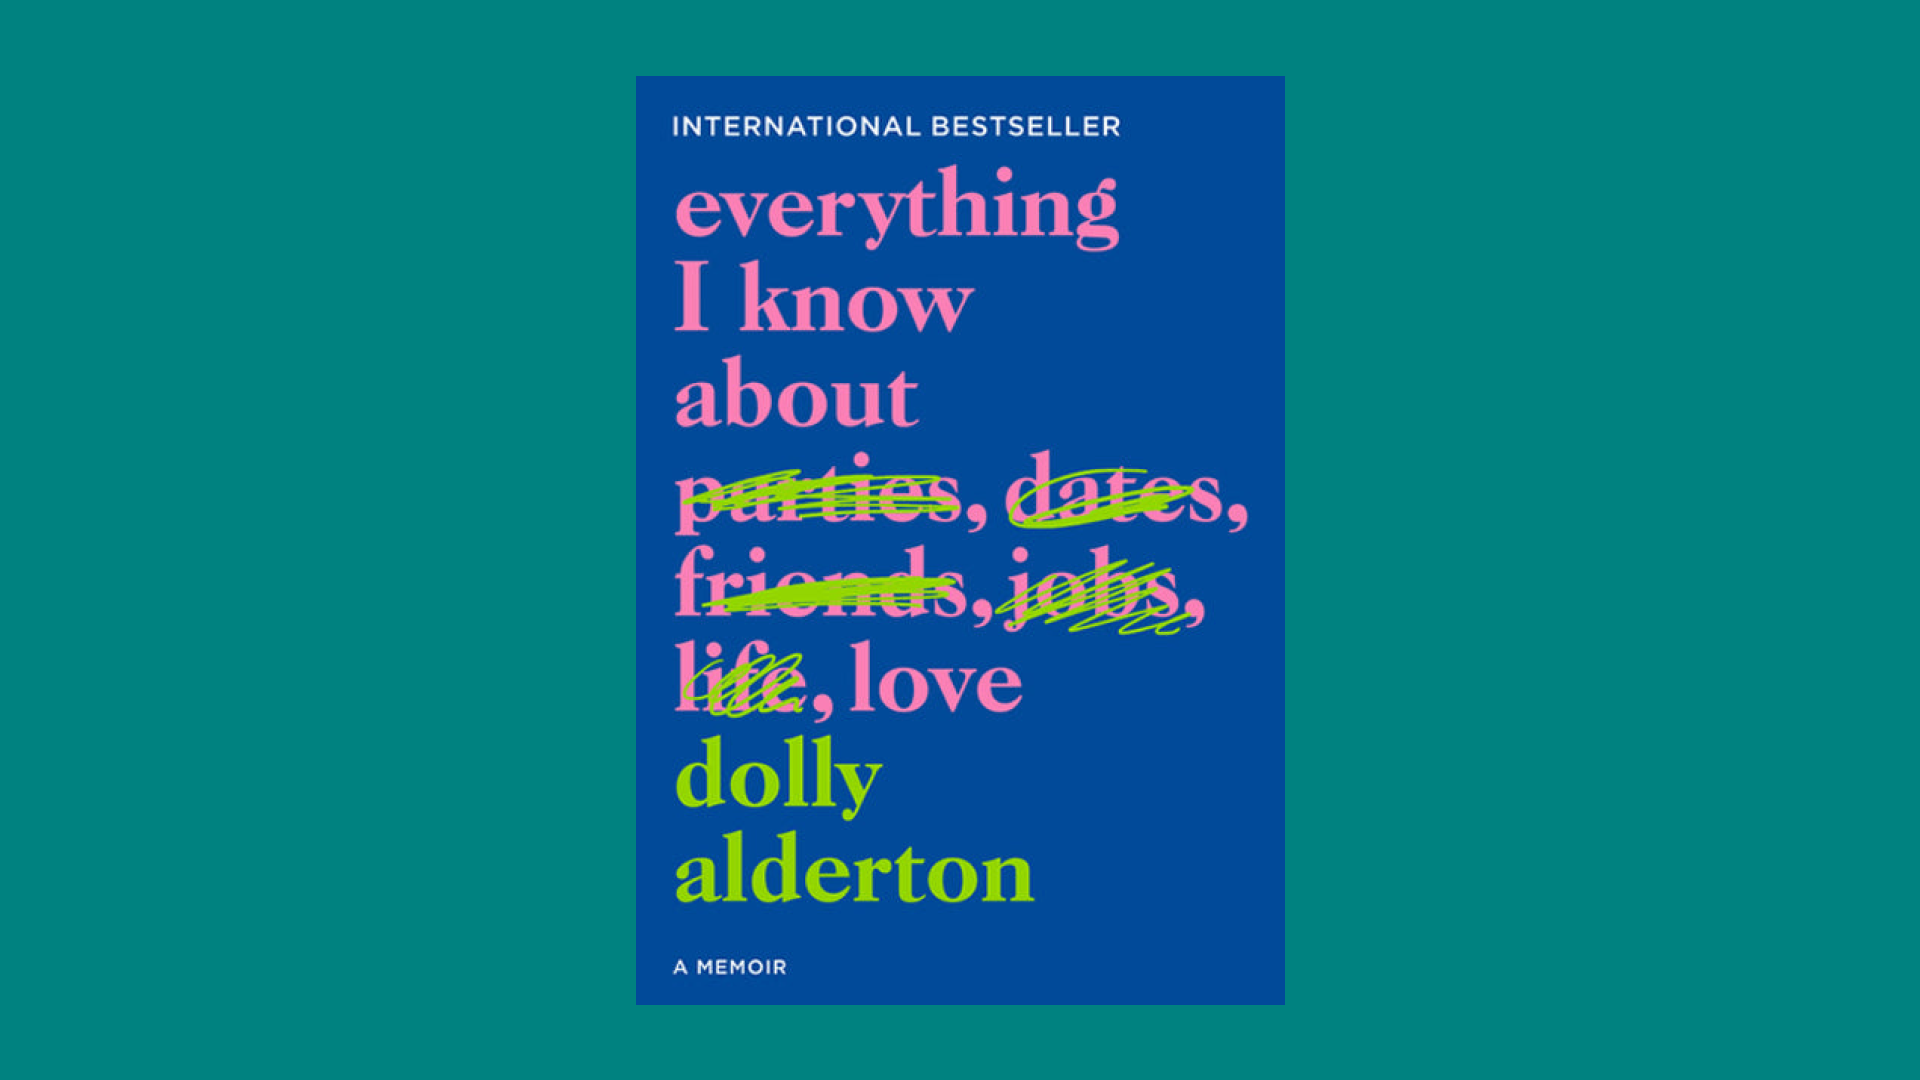 “Everything I Know About Love” by Dolly Alderton